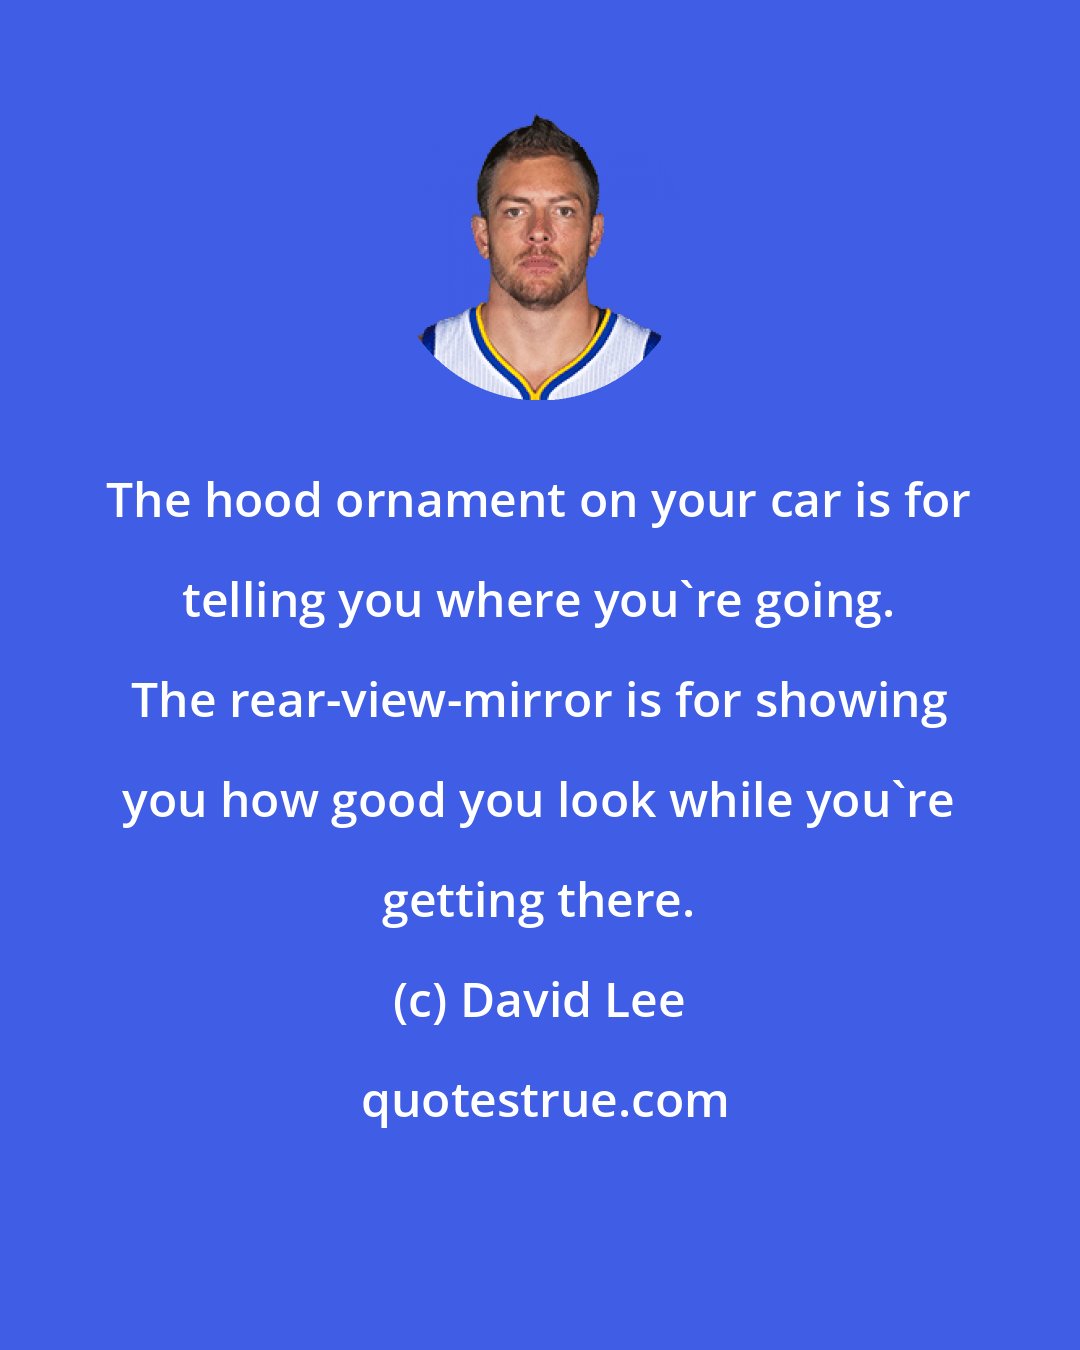 David Lee: The hood ornament on your car is for telling you where you're going. The rear-view-mirror is for showing you how good you look while you're getting there.